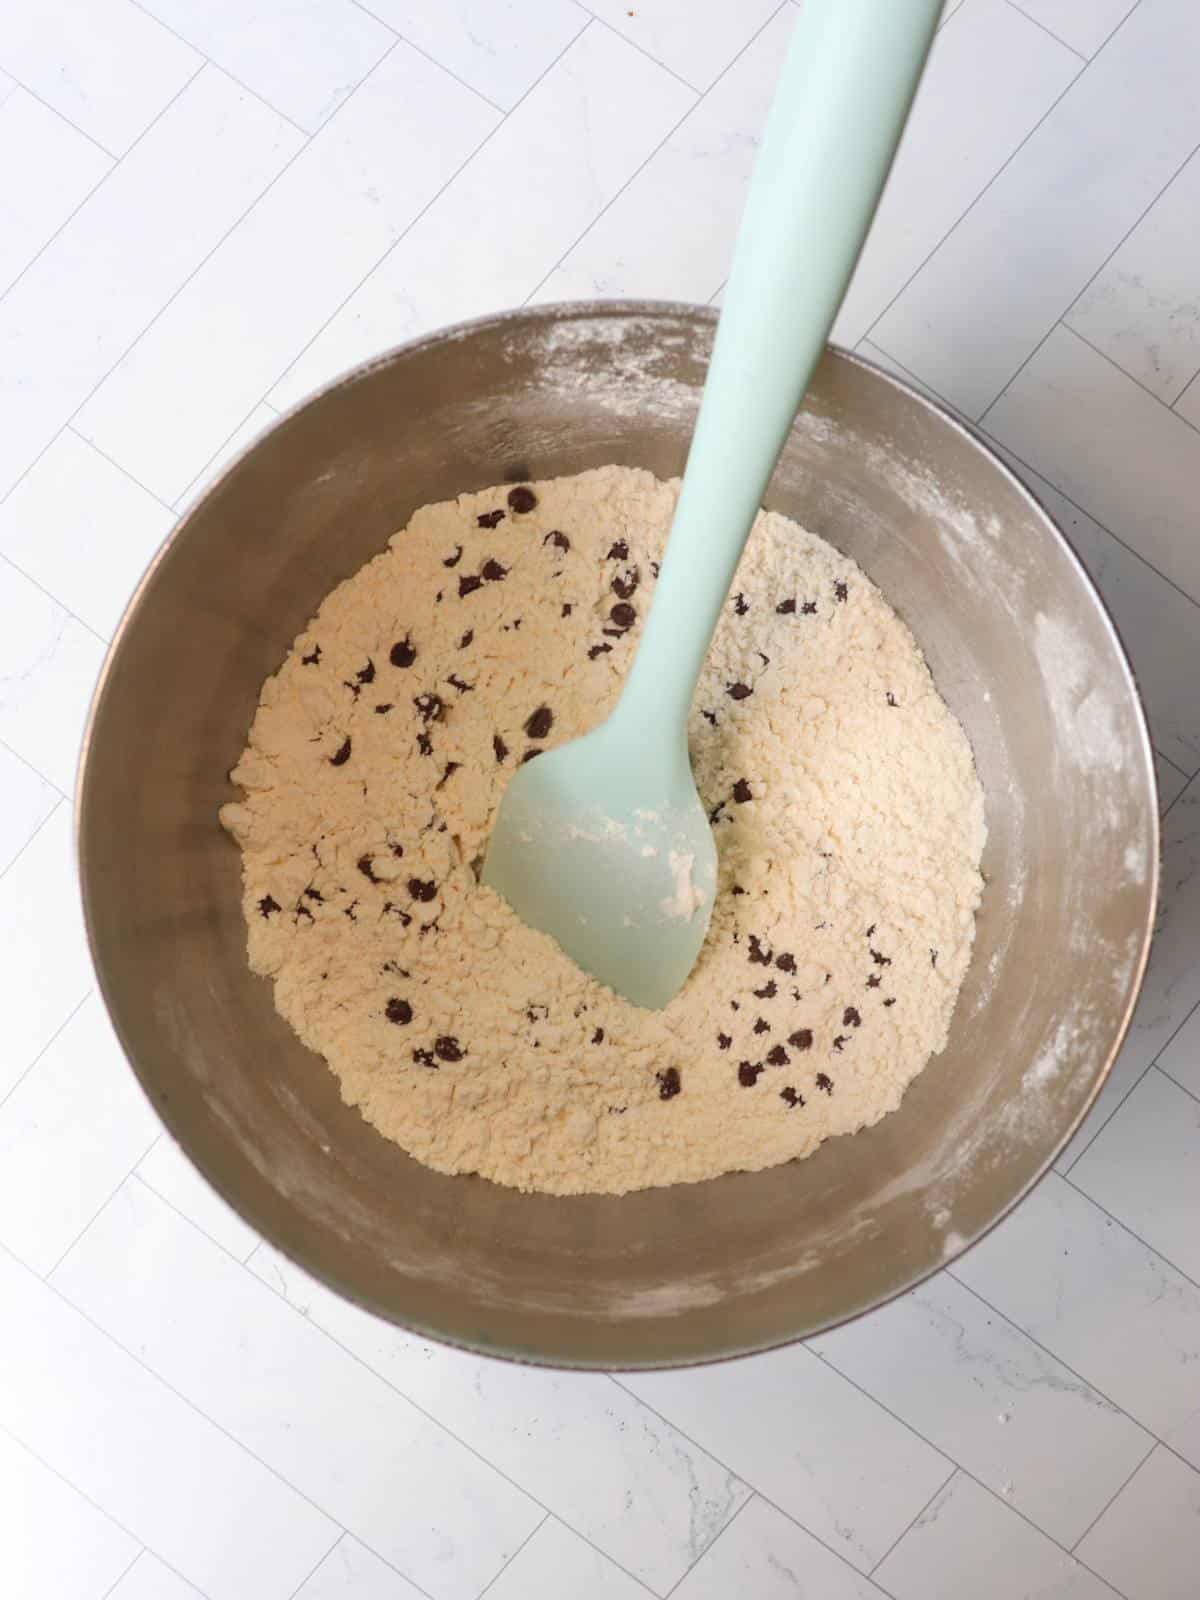 Dry ingredients for vegan banana muffins in a small mixing bowl with a rubber spatula.